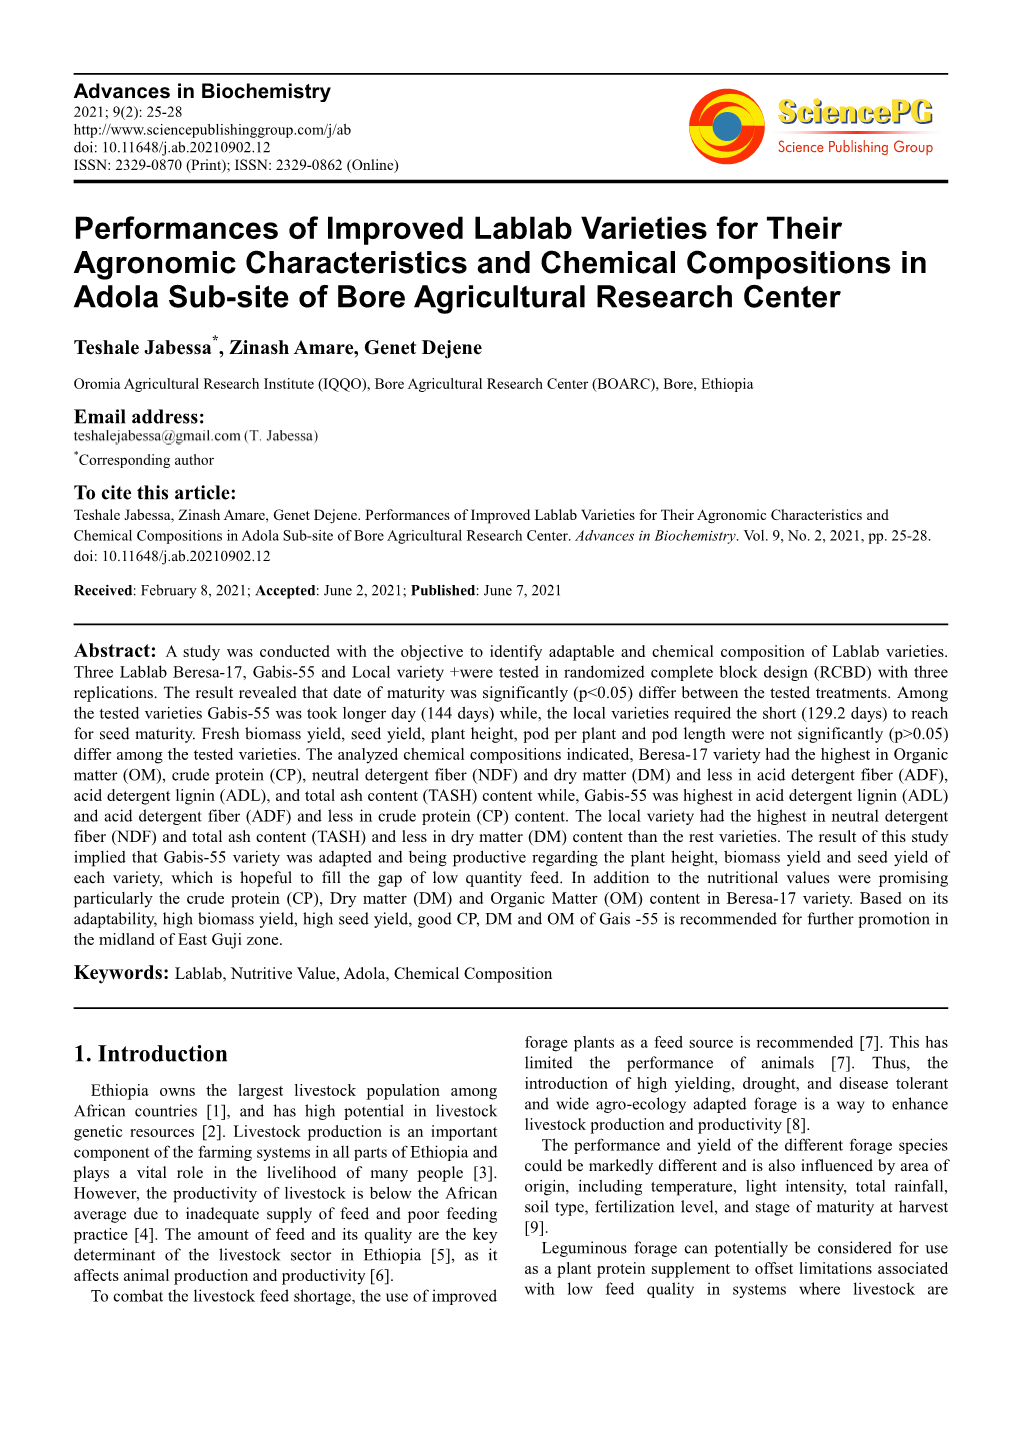 Performances of Improved Lablab Varieties for Their Agronomic Characteristics and Chemical Compositions in Adola Sub-Site of Bore Agricultural Research Center